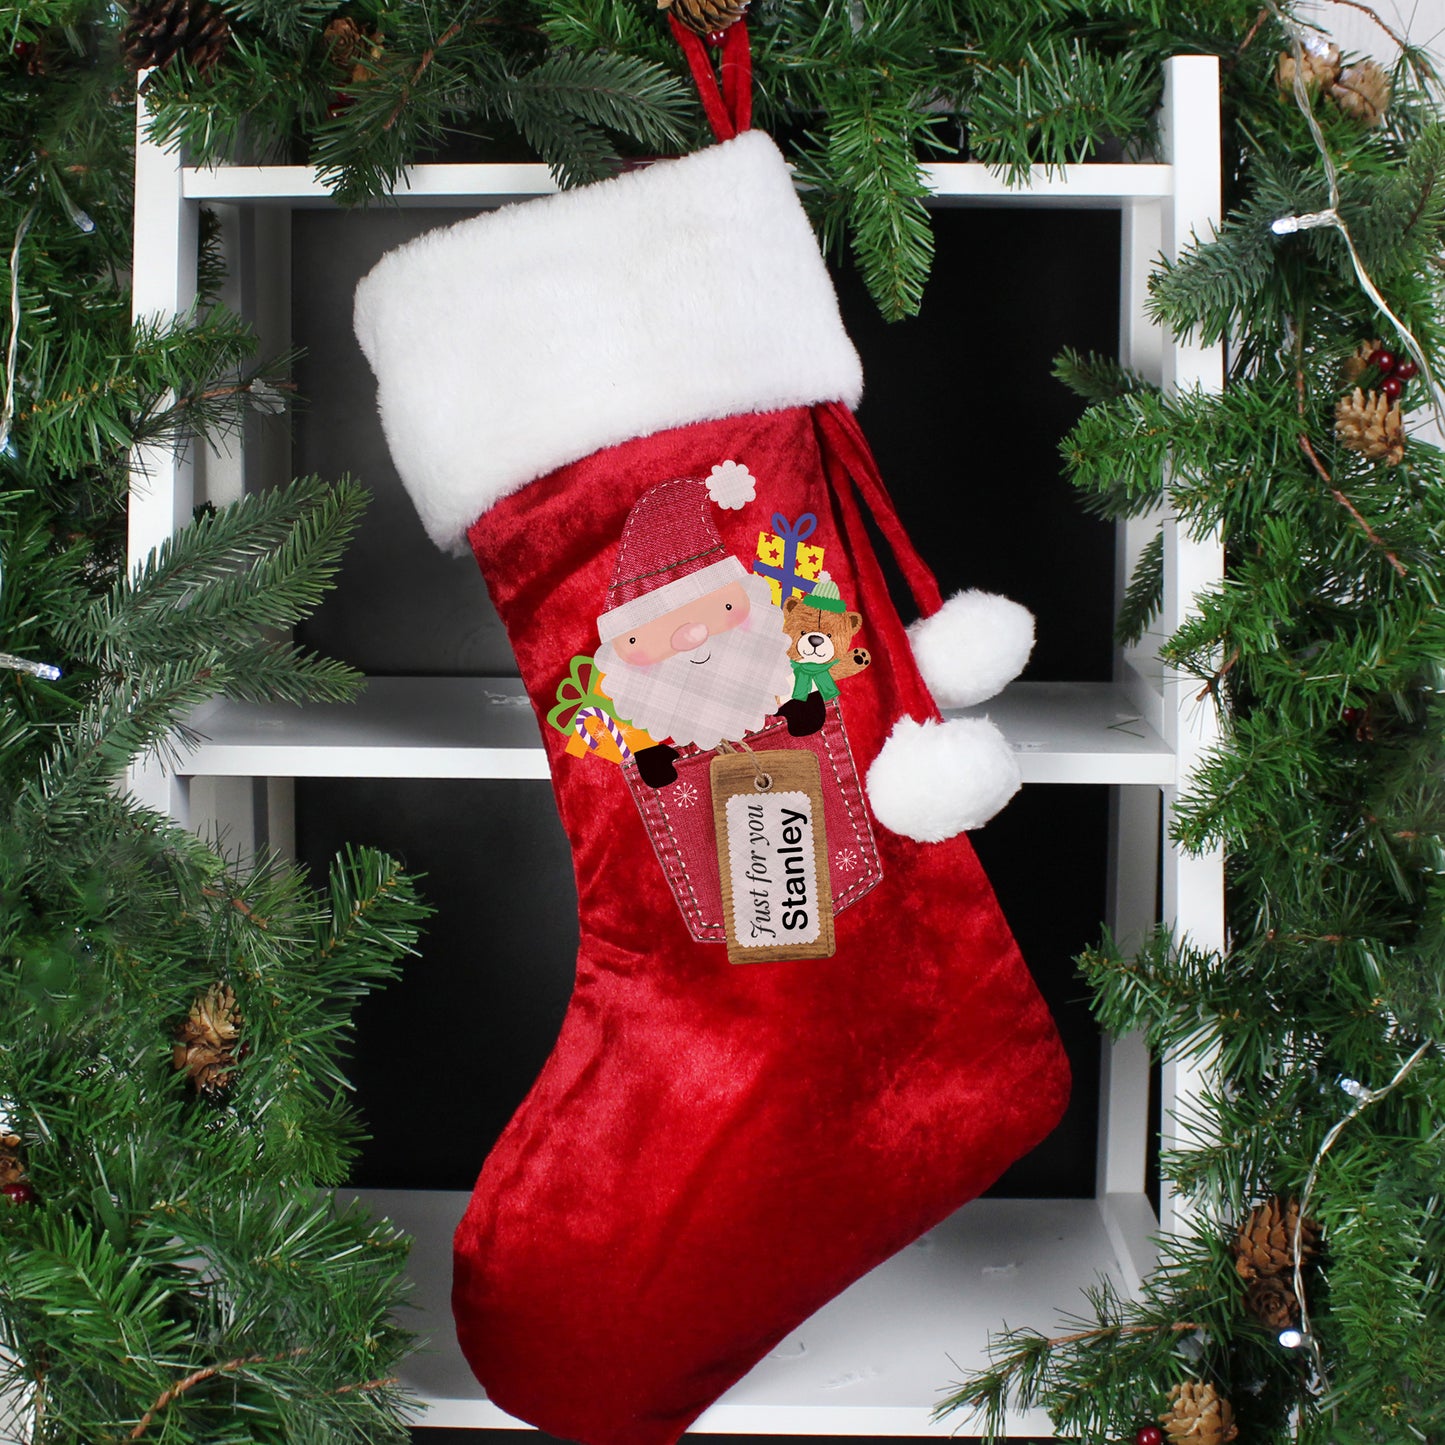 Santa Claus luxury red stocking, personalised - Lilybet loves